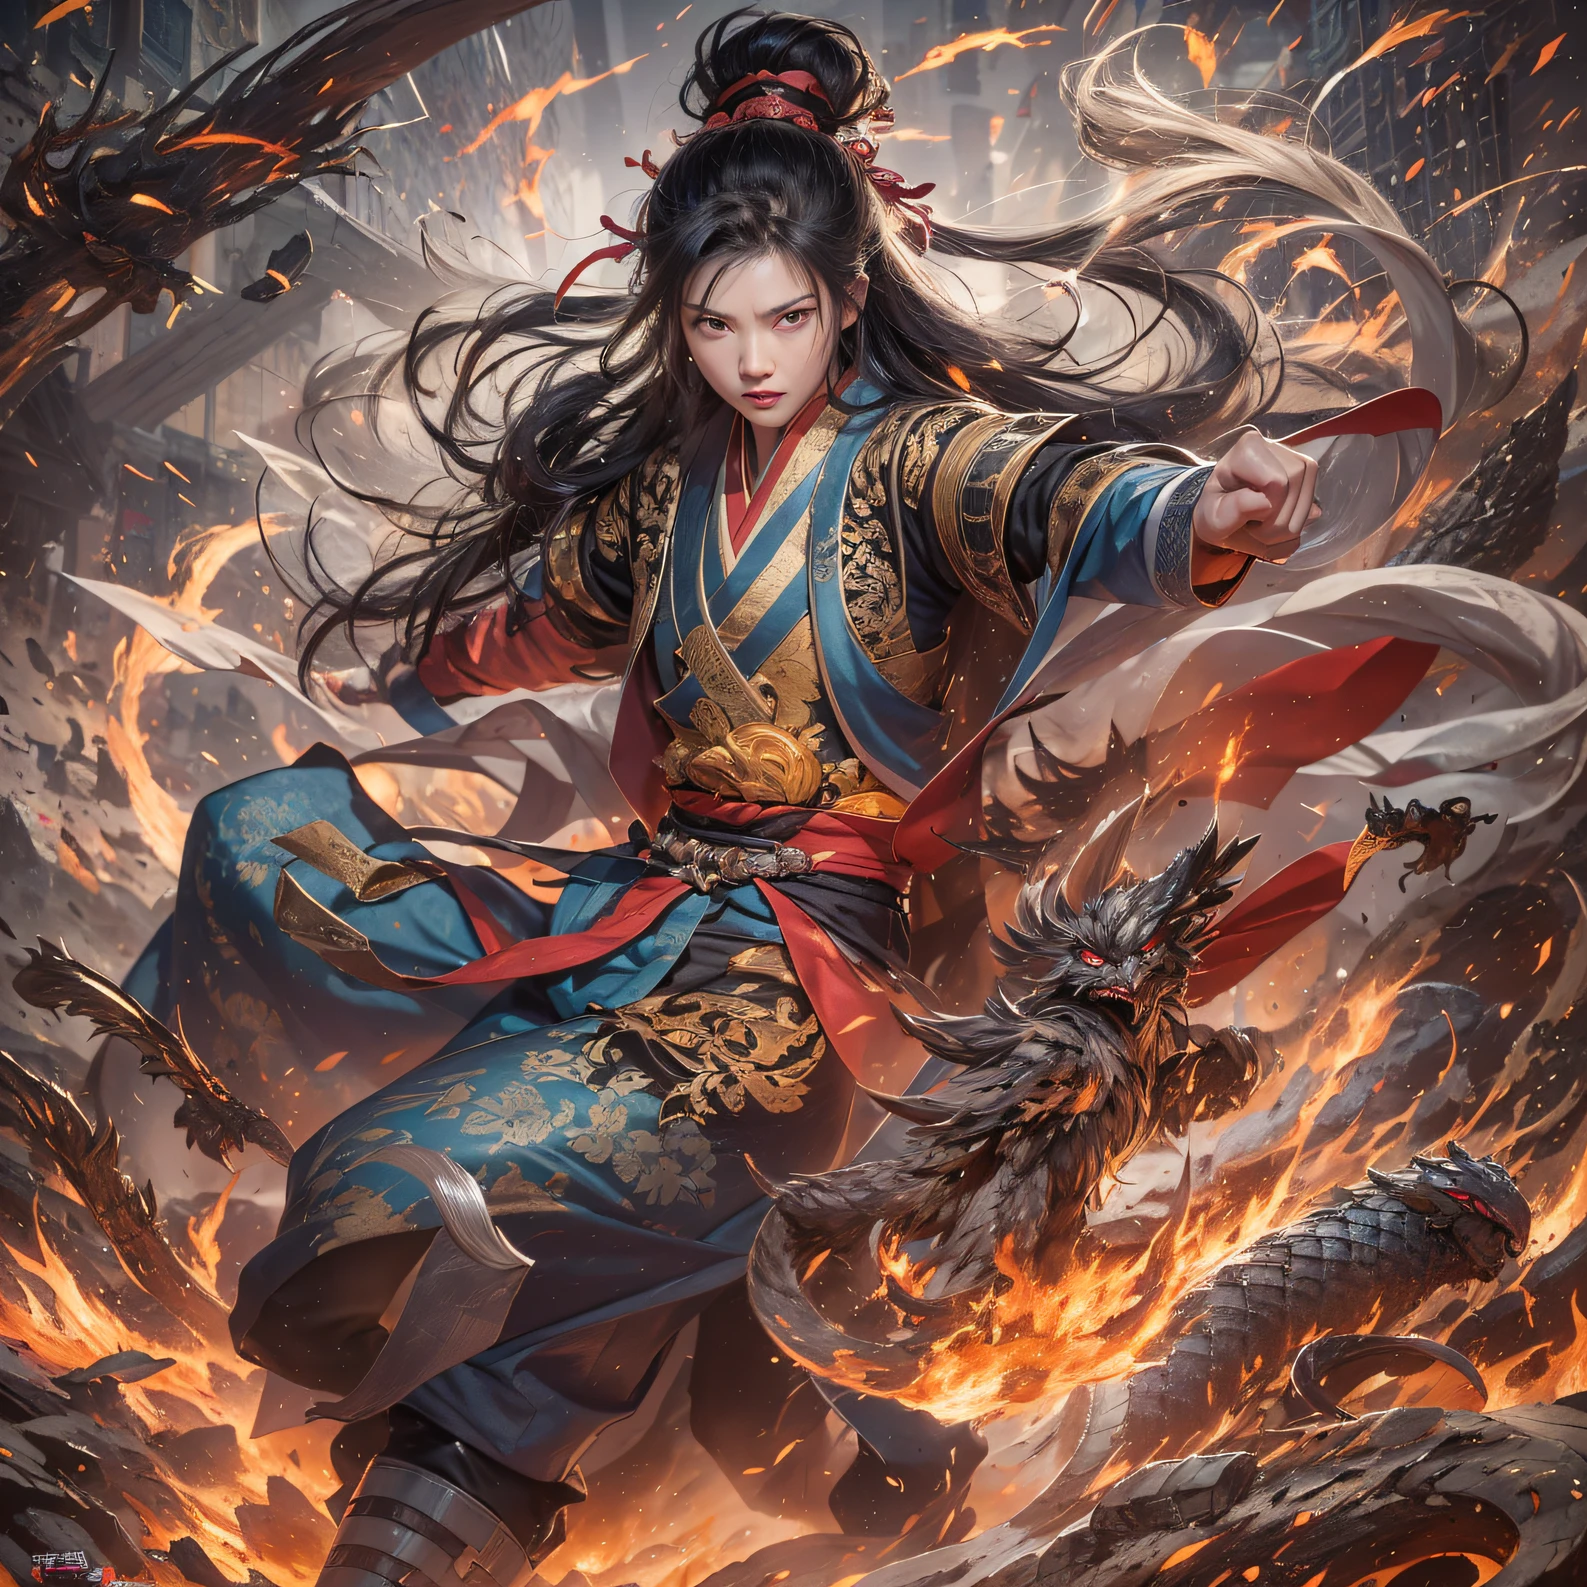 In order to obtain the oracle of fate, Demons invade the Aoba family，The leader of the demon clan personally went down to fight Ye Xingyun, But in the end, He was defeated by Ye Xingyun in one move, At the same time, King Qi, Jiang Shang, Come to Ningcheng，Finally recognized Ye Xingyun's father and son, And found that Ye Xingyun is a rare eight-vein missing constitution, This is extremely beneficial to cultivating the Jiang Family Ancestor Extreme Heavenly Dao Skill。。, But just when Ye Xingyun was taught by King Qi Xiuwei。，In terms of improving self-cultivation, The mysterious woman An Yun suddenly appeared, In order to get the Nine Heavens Goddess Diagram on Ye Xingyun's body。。。, She took it away with valve technology, but accidentally got involved in the grudge between the demon and Ye Xingyun。（Colorful ruins）Climb the streets（Armageddon）eyes filled with angry，He clenched his fists，Rush up，Deliver a fatal blow to your opponent，full bodyesbian，Full Body Male Mage 32K（tmasterpiece，Color Ultra HD）Long flowing black hair，Campsite size，zydink， The wounded lined up in the streets（Doomsday ruins）Climb the streets， The scene of the explosion（Doomsday ruins）， （Linen batik scarf）， Angry fighting stance， looking at the ground， Batik linen bandana， Chinese python pattern long-sleeved garment， rainbowing（Abstract propylene splash：1.2）， Dark clouds lightning background，Flour flies（realisticlying：1.4），Black color hair，Flour fluttering，rainbow background， A high resolution， the detail， RAW photogr， Sharp Re， Nikon D850 Film Stock Photo by Jefferies Lee 4 Kodak Portra 400 Camera F1.6 shots, Rich colors, ultra-realistic vivid textures, Dramatic lighting, Unreal Engine Art Station Trend, cinestir 800，Flowing black hair,（（（morningglow）））The wounded lined up in the streets（Color）Climb the streets，（Linen batik scarf）， Angry fighting stance， looking at the ground， Batik linen bandana， Chinese python pattern long-sleeved garment， （Abstract propylene splash：1.2）（（（dense smoke））），The male